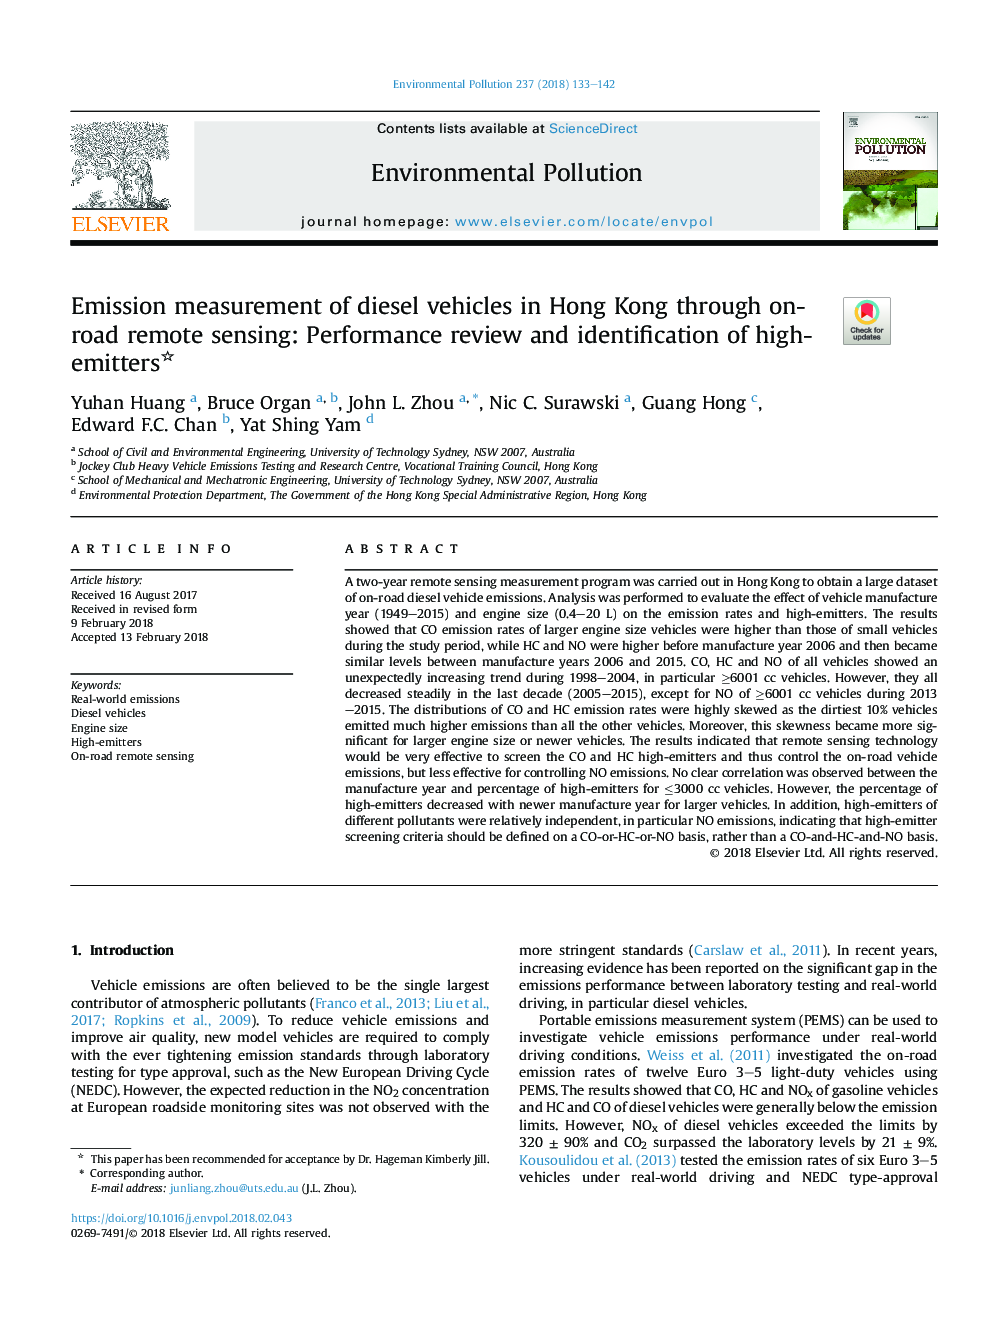 Emission measurement of diesel vehicles in Hong Kong through on-road remote sensing: Performance review and identification of high-emitters